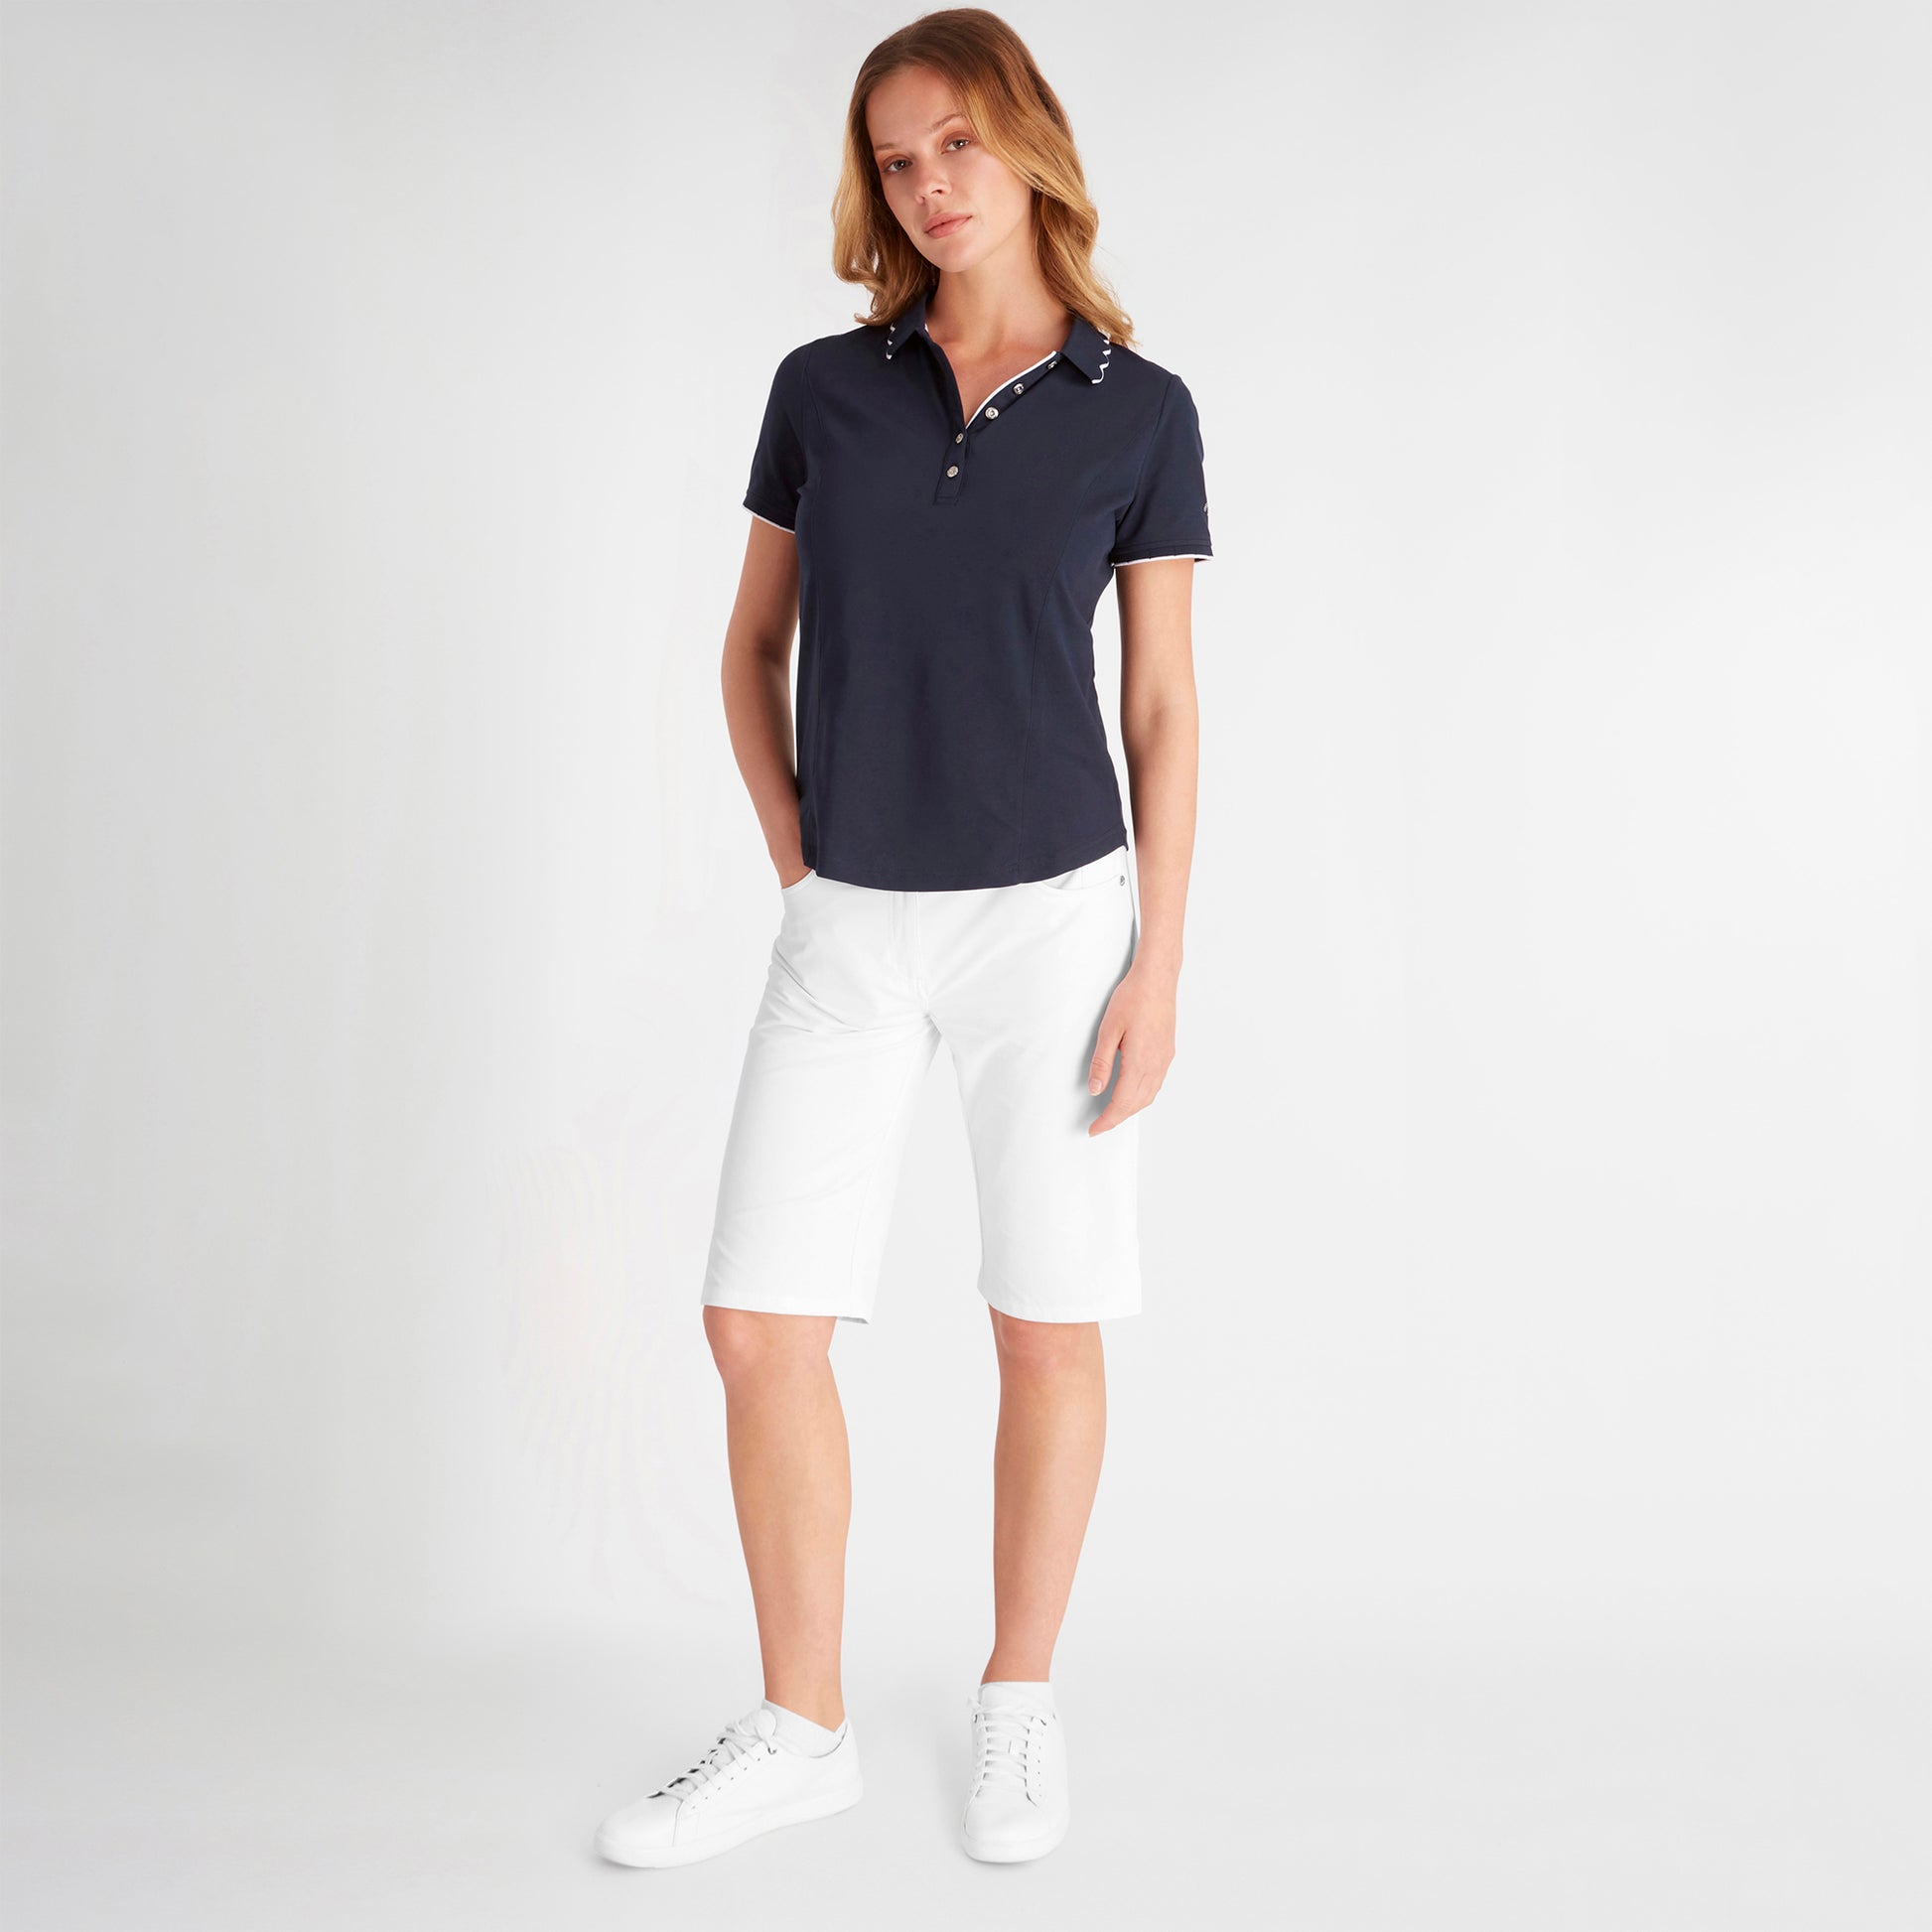 Green Lamb Ladies Short Sleeve Navy Golf Polo with Scalloped Collar